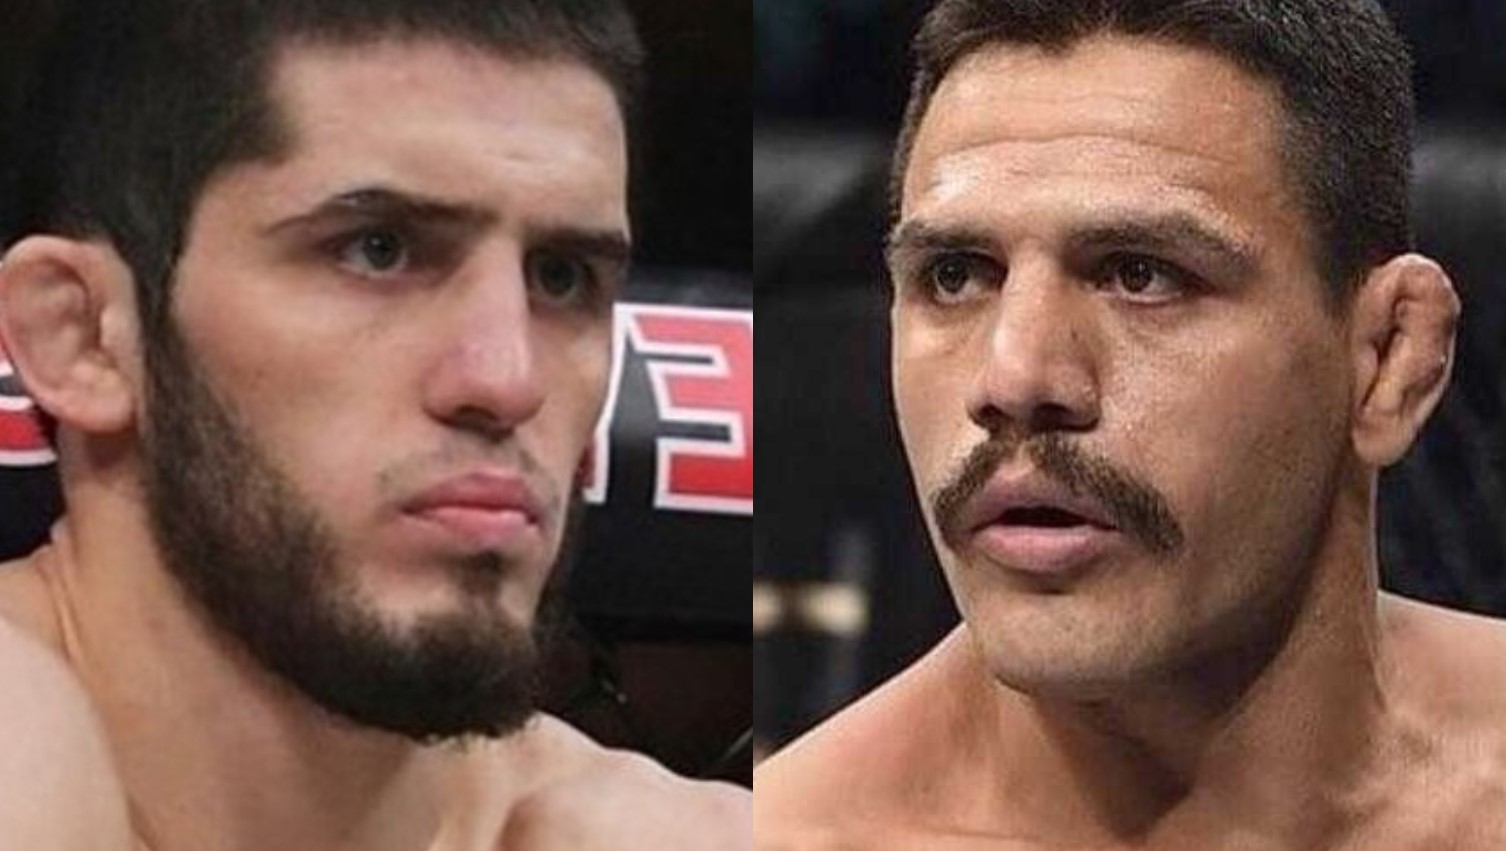 What Happens With Islam Makhachev After Moicano vs. RDA Matchup?